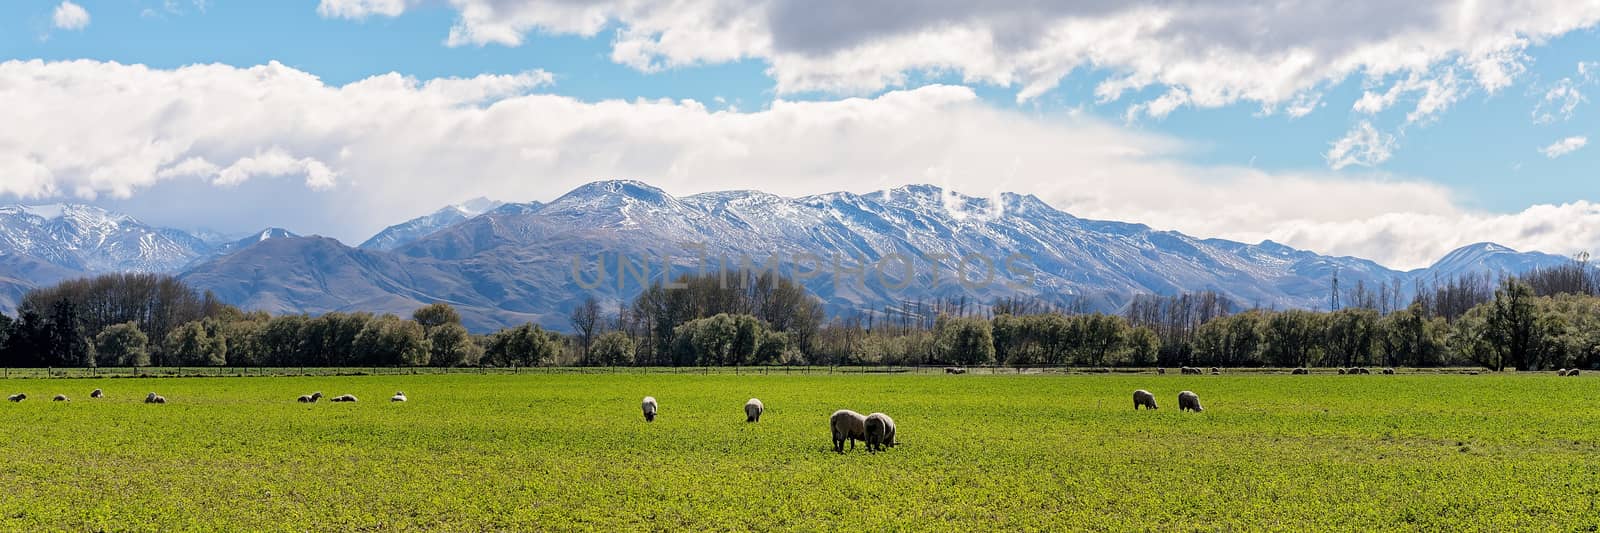 Sheep Grazing In A Field With Snowy Alps by 	JacksonStock